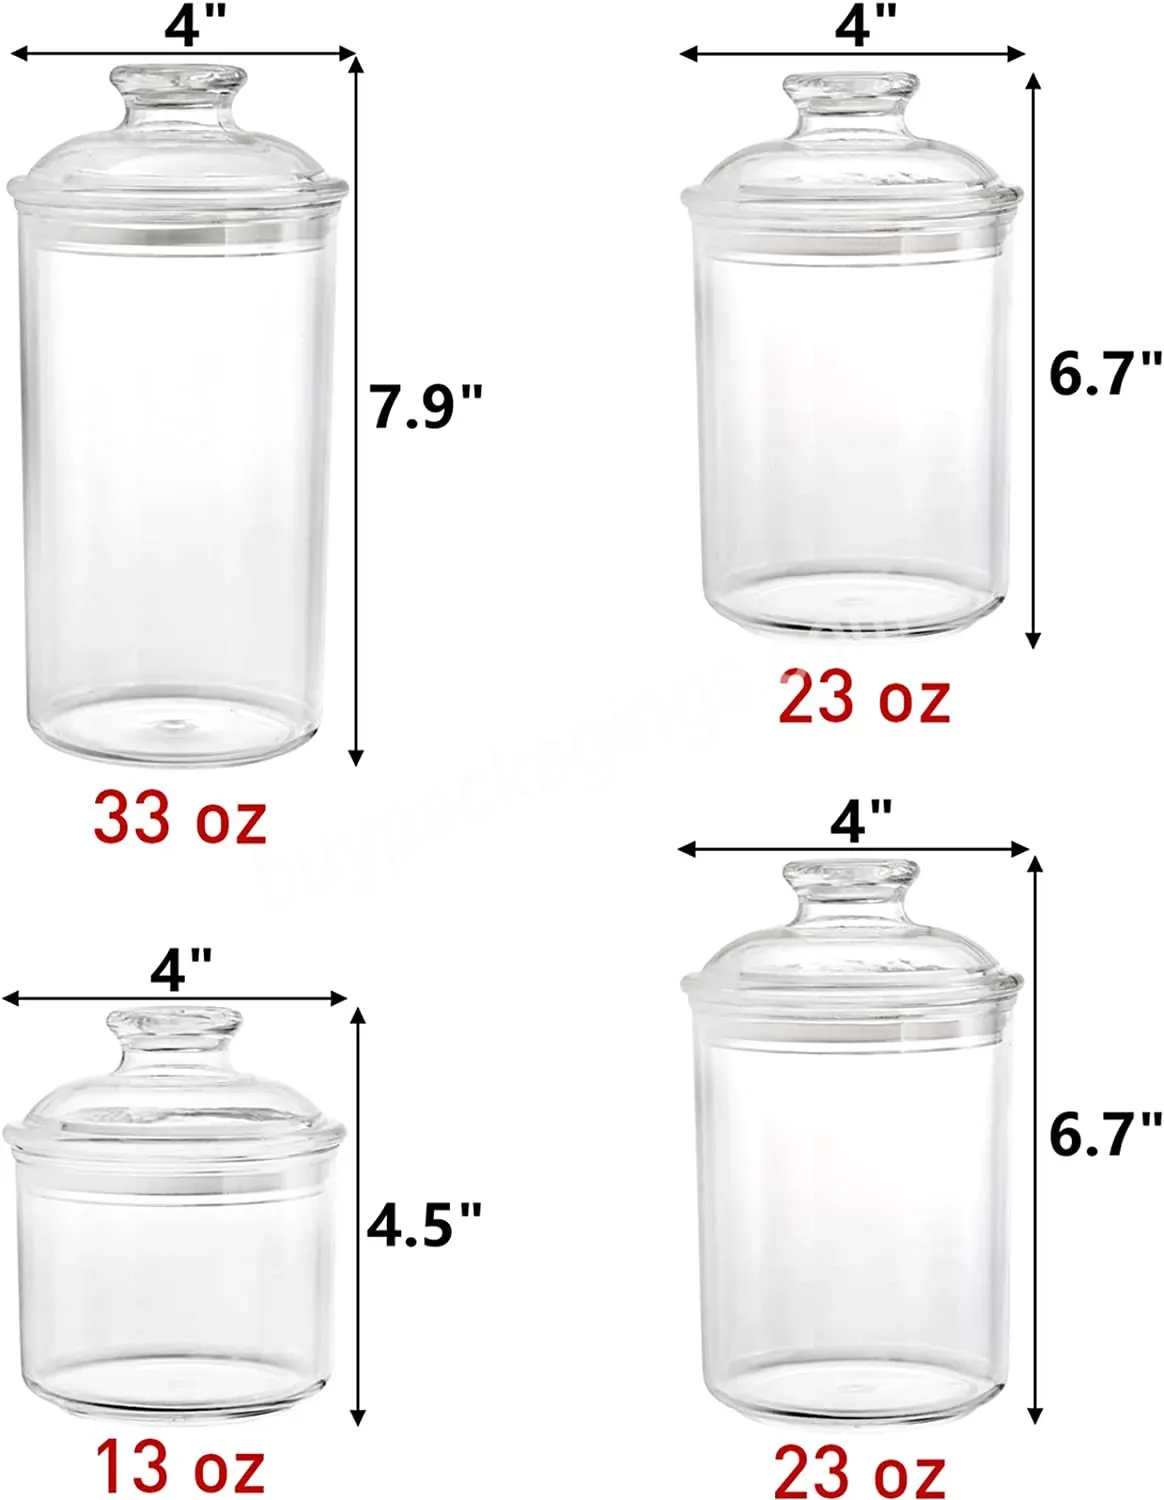 Clear Plastic Apothecary Jars Plastic Storage Jar Canister With Airtight Lid Candy Cookie Container Organizer For Bath Salt Pad - Buy 33 Oz/23 Oz/13 Oz Plastic Storage Jar Canister With Airtight Lid,Candy Cookie Container Organizer For Bath Salt Pad,